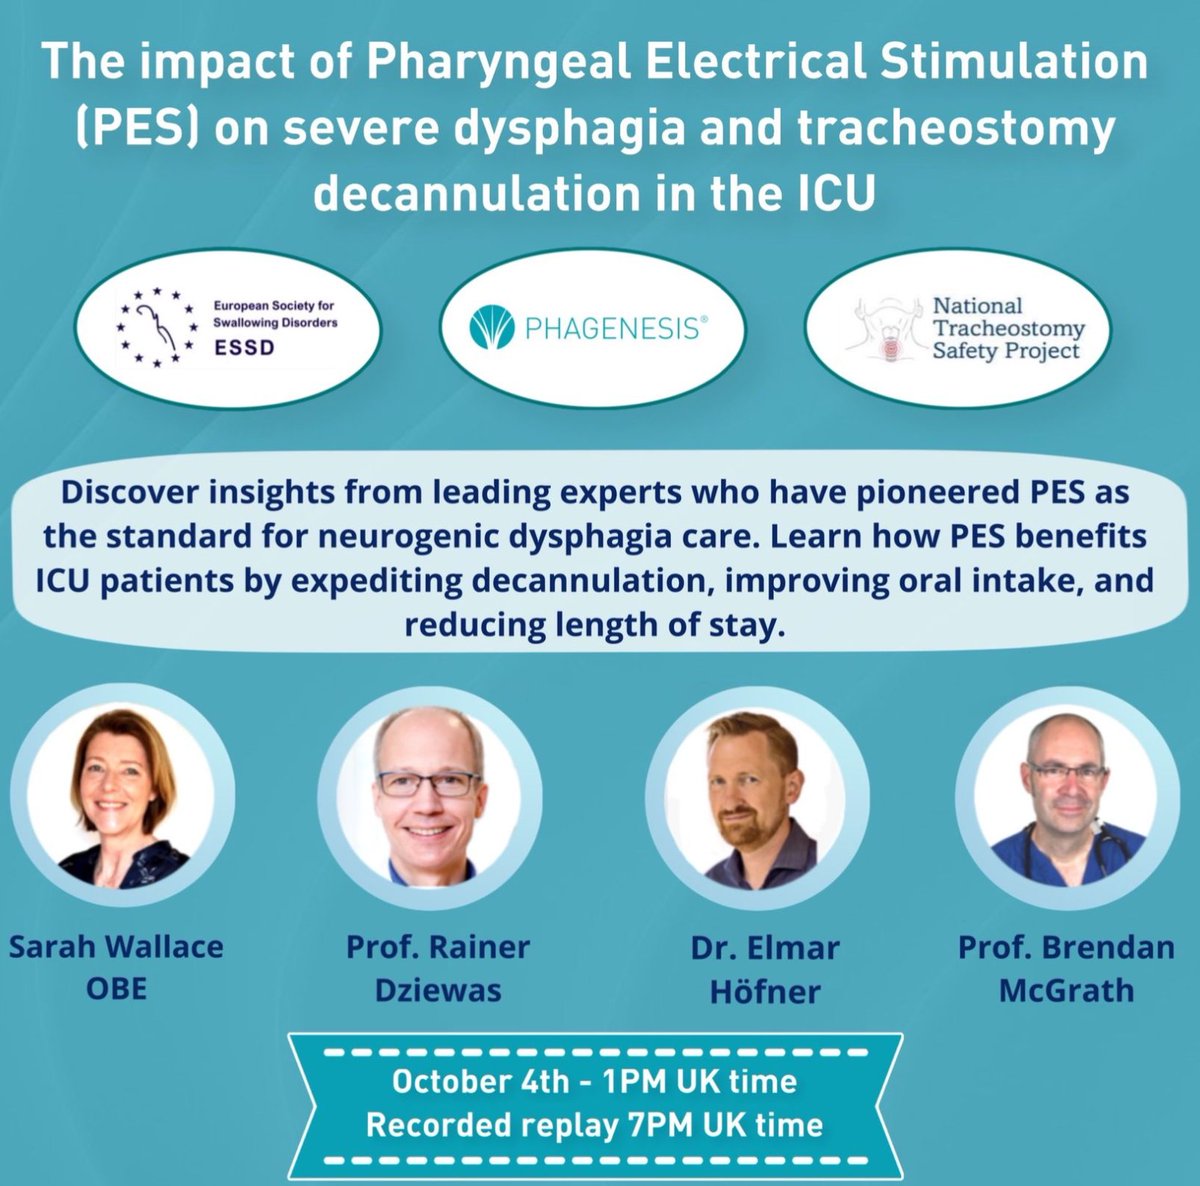 HAPPY FRIDAY! Don't forget to register for the FREE ICU webinar, discussing the impact of PES on crit care dysphagia and decannulation status. Over 230 have already registered, don't miss out! UK 1PM OCT 4TH: loom.ly/zpzDOow UK 7PM OCT 4TH: loom.ly/K5FSnfs